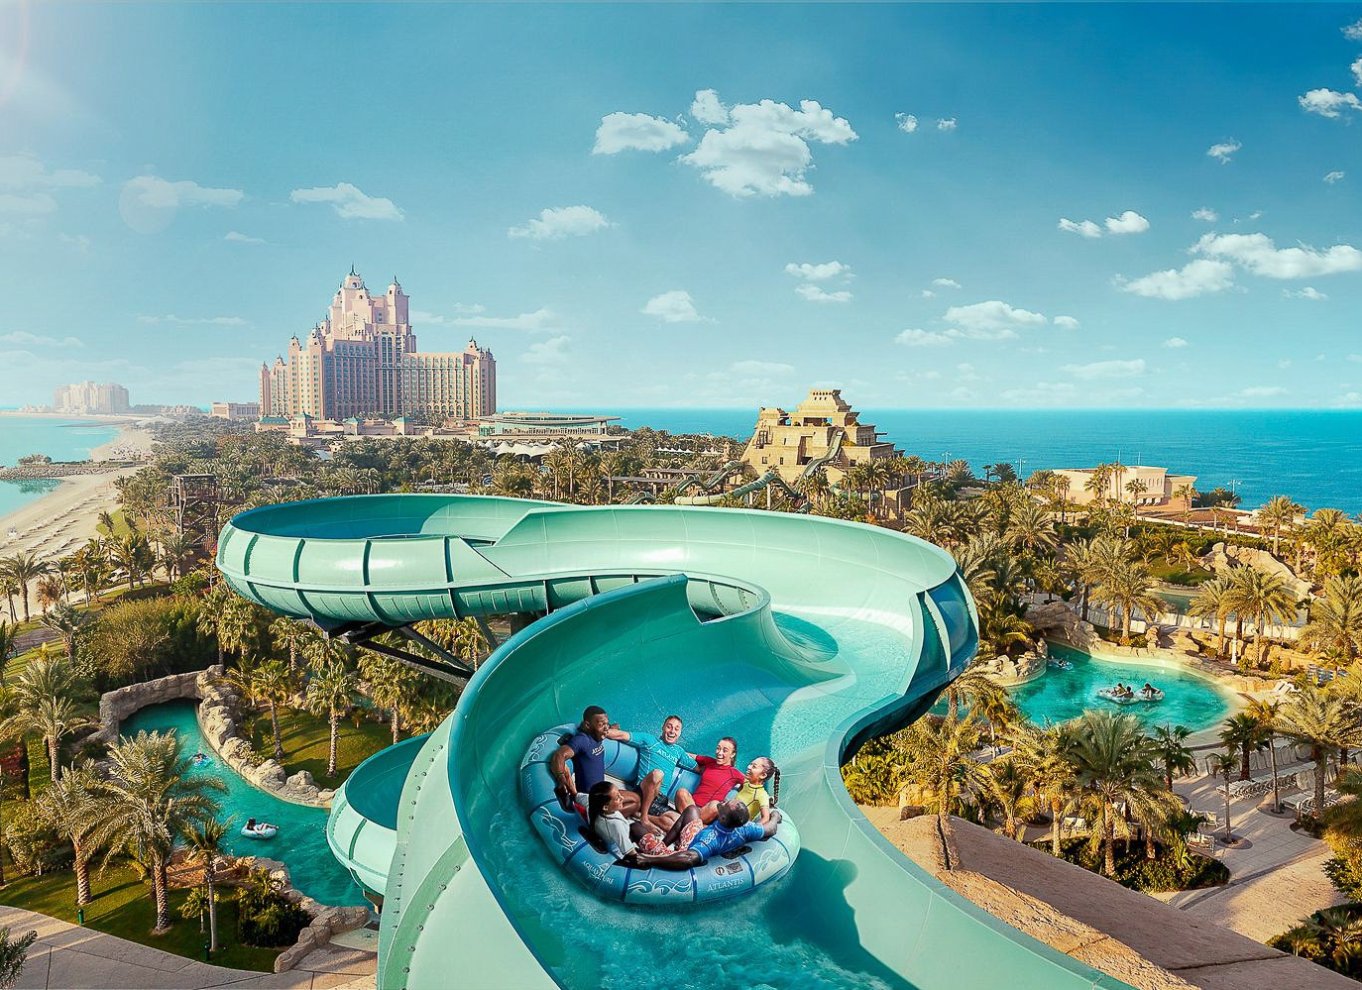 Wild Wadi Waterpark: An Enthralling Adventure - My First-Hand Account